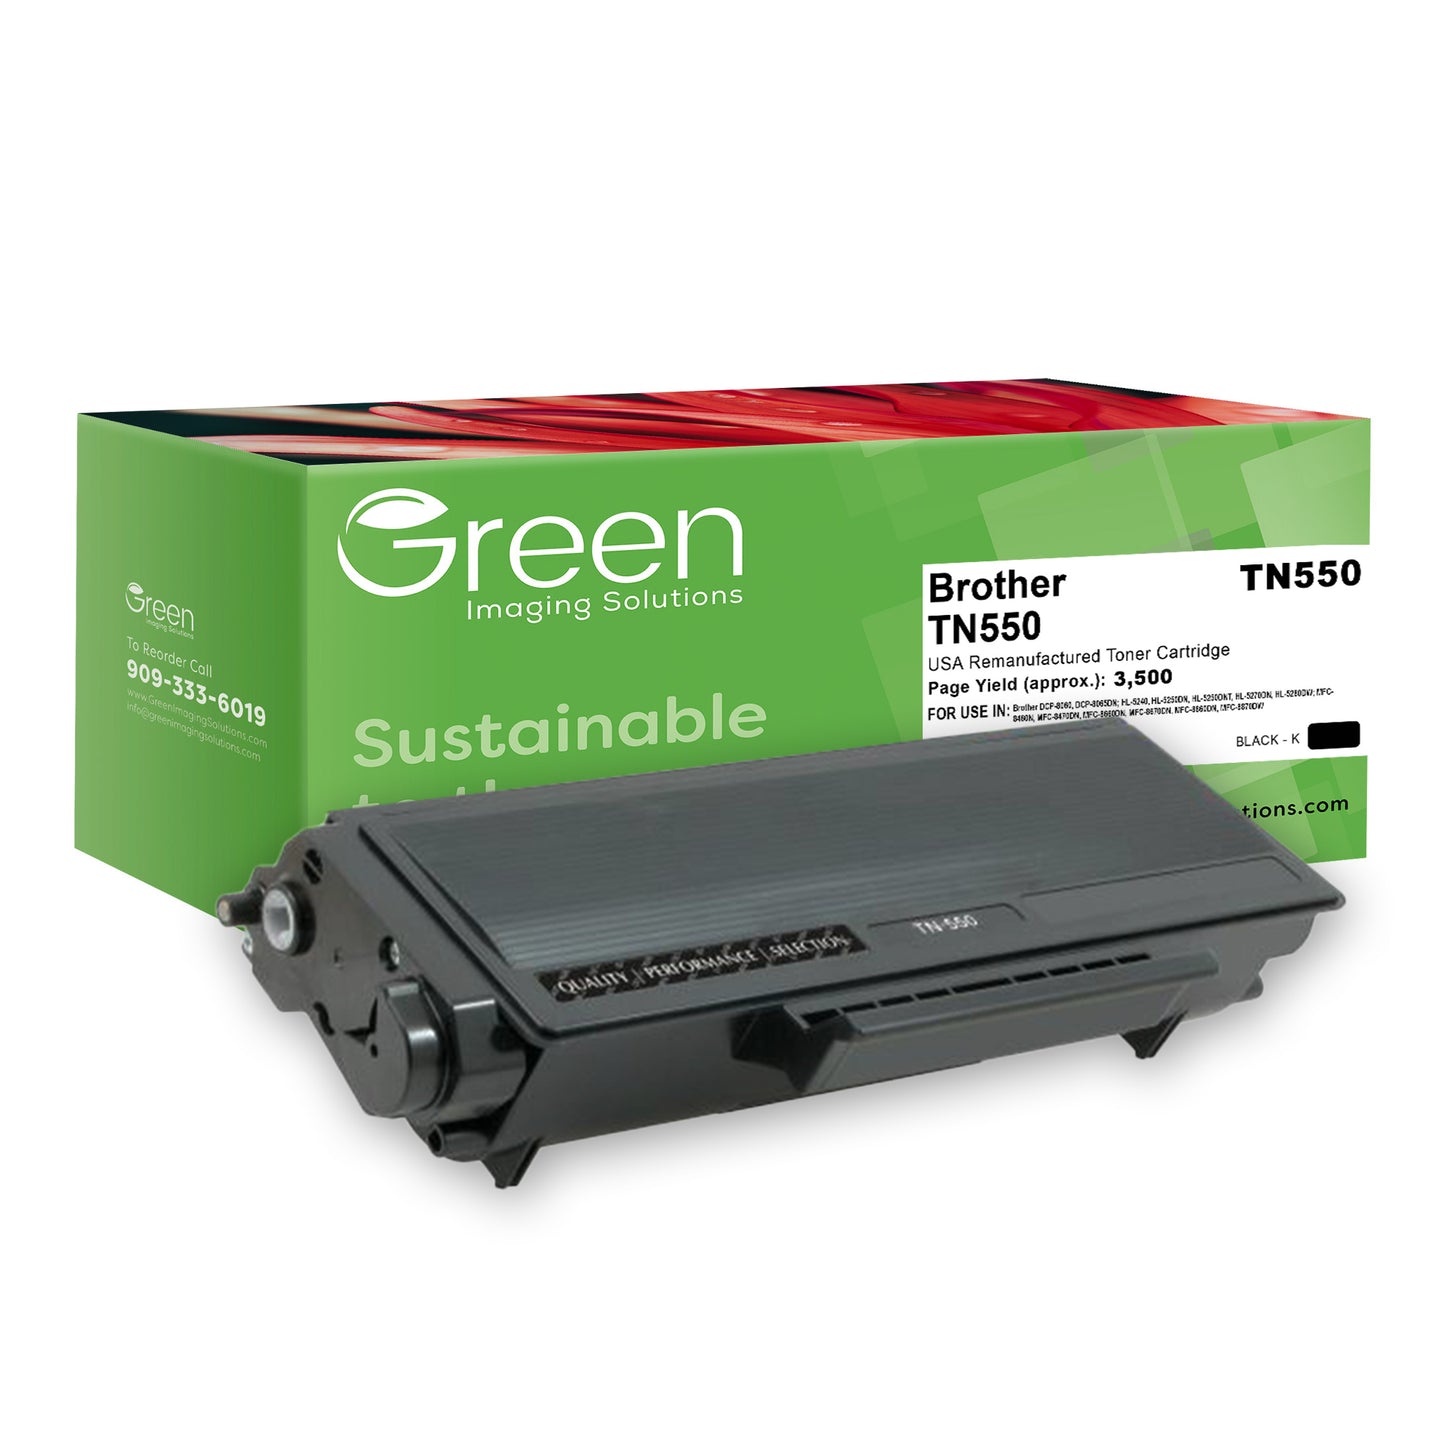 Green Imaging Solutions USA Remanufactured Toner Cartridge for Brother TN550